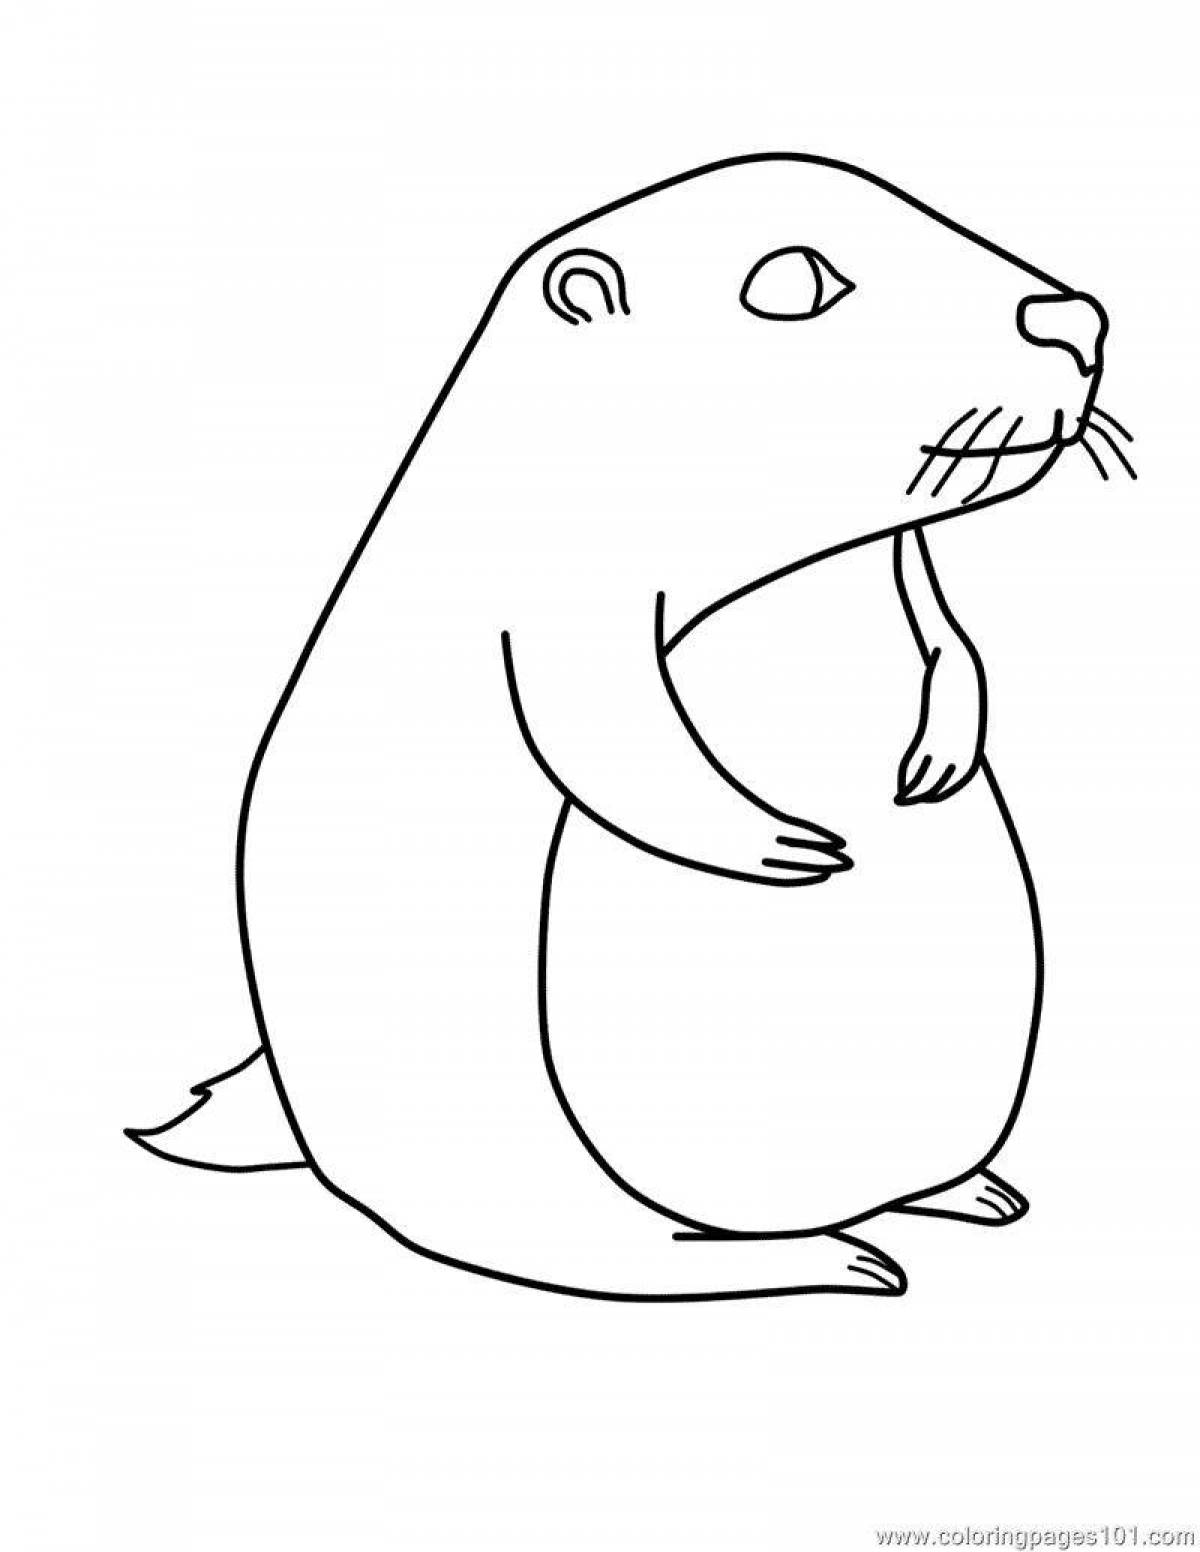 Coloring book happy gopher for kids